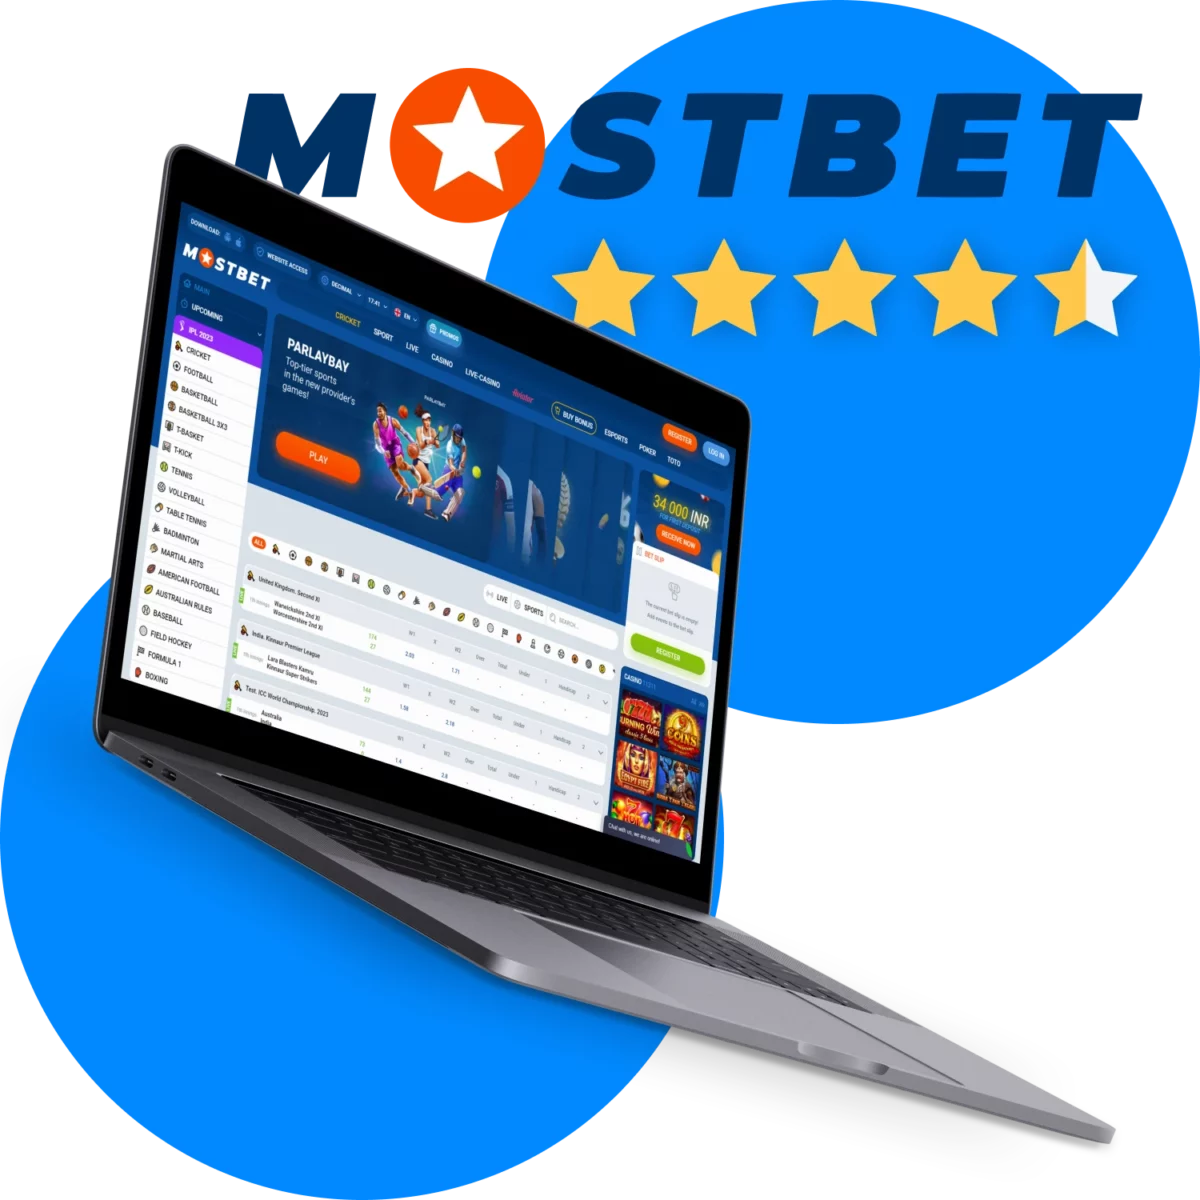 Mostbet AZ 90 Bookmaker and Casino in Azerbaijan And Other Products